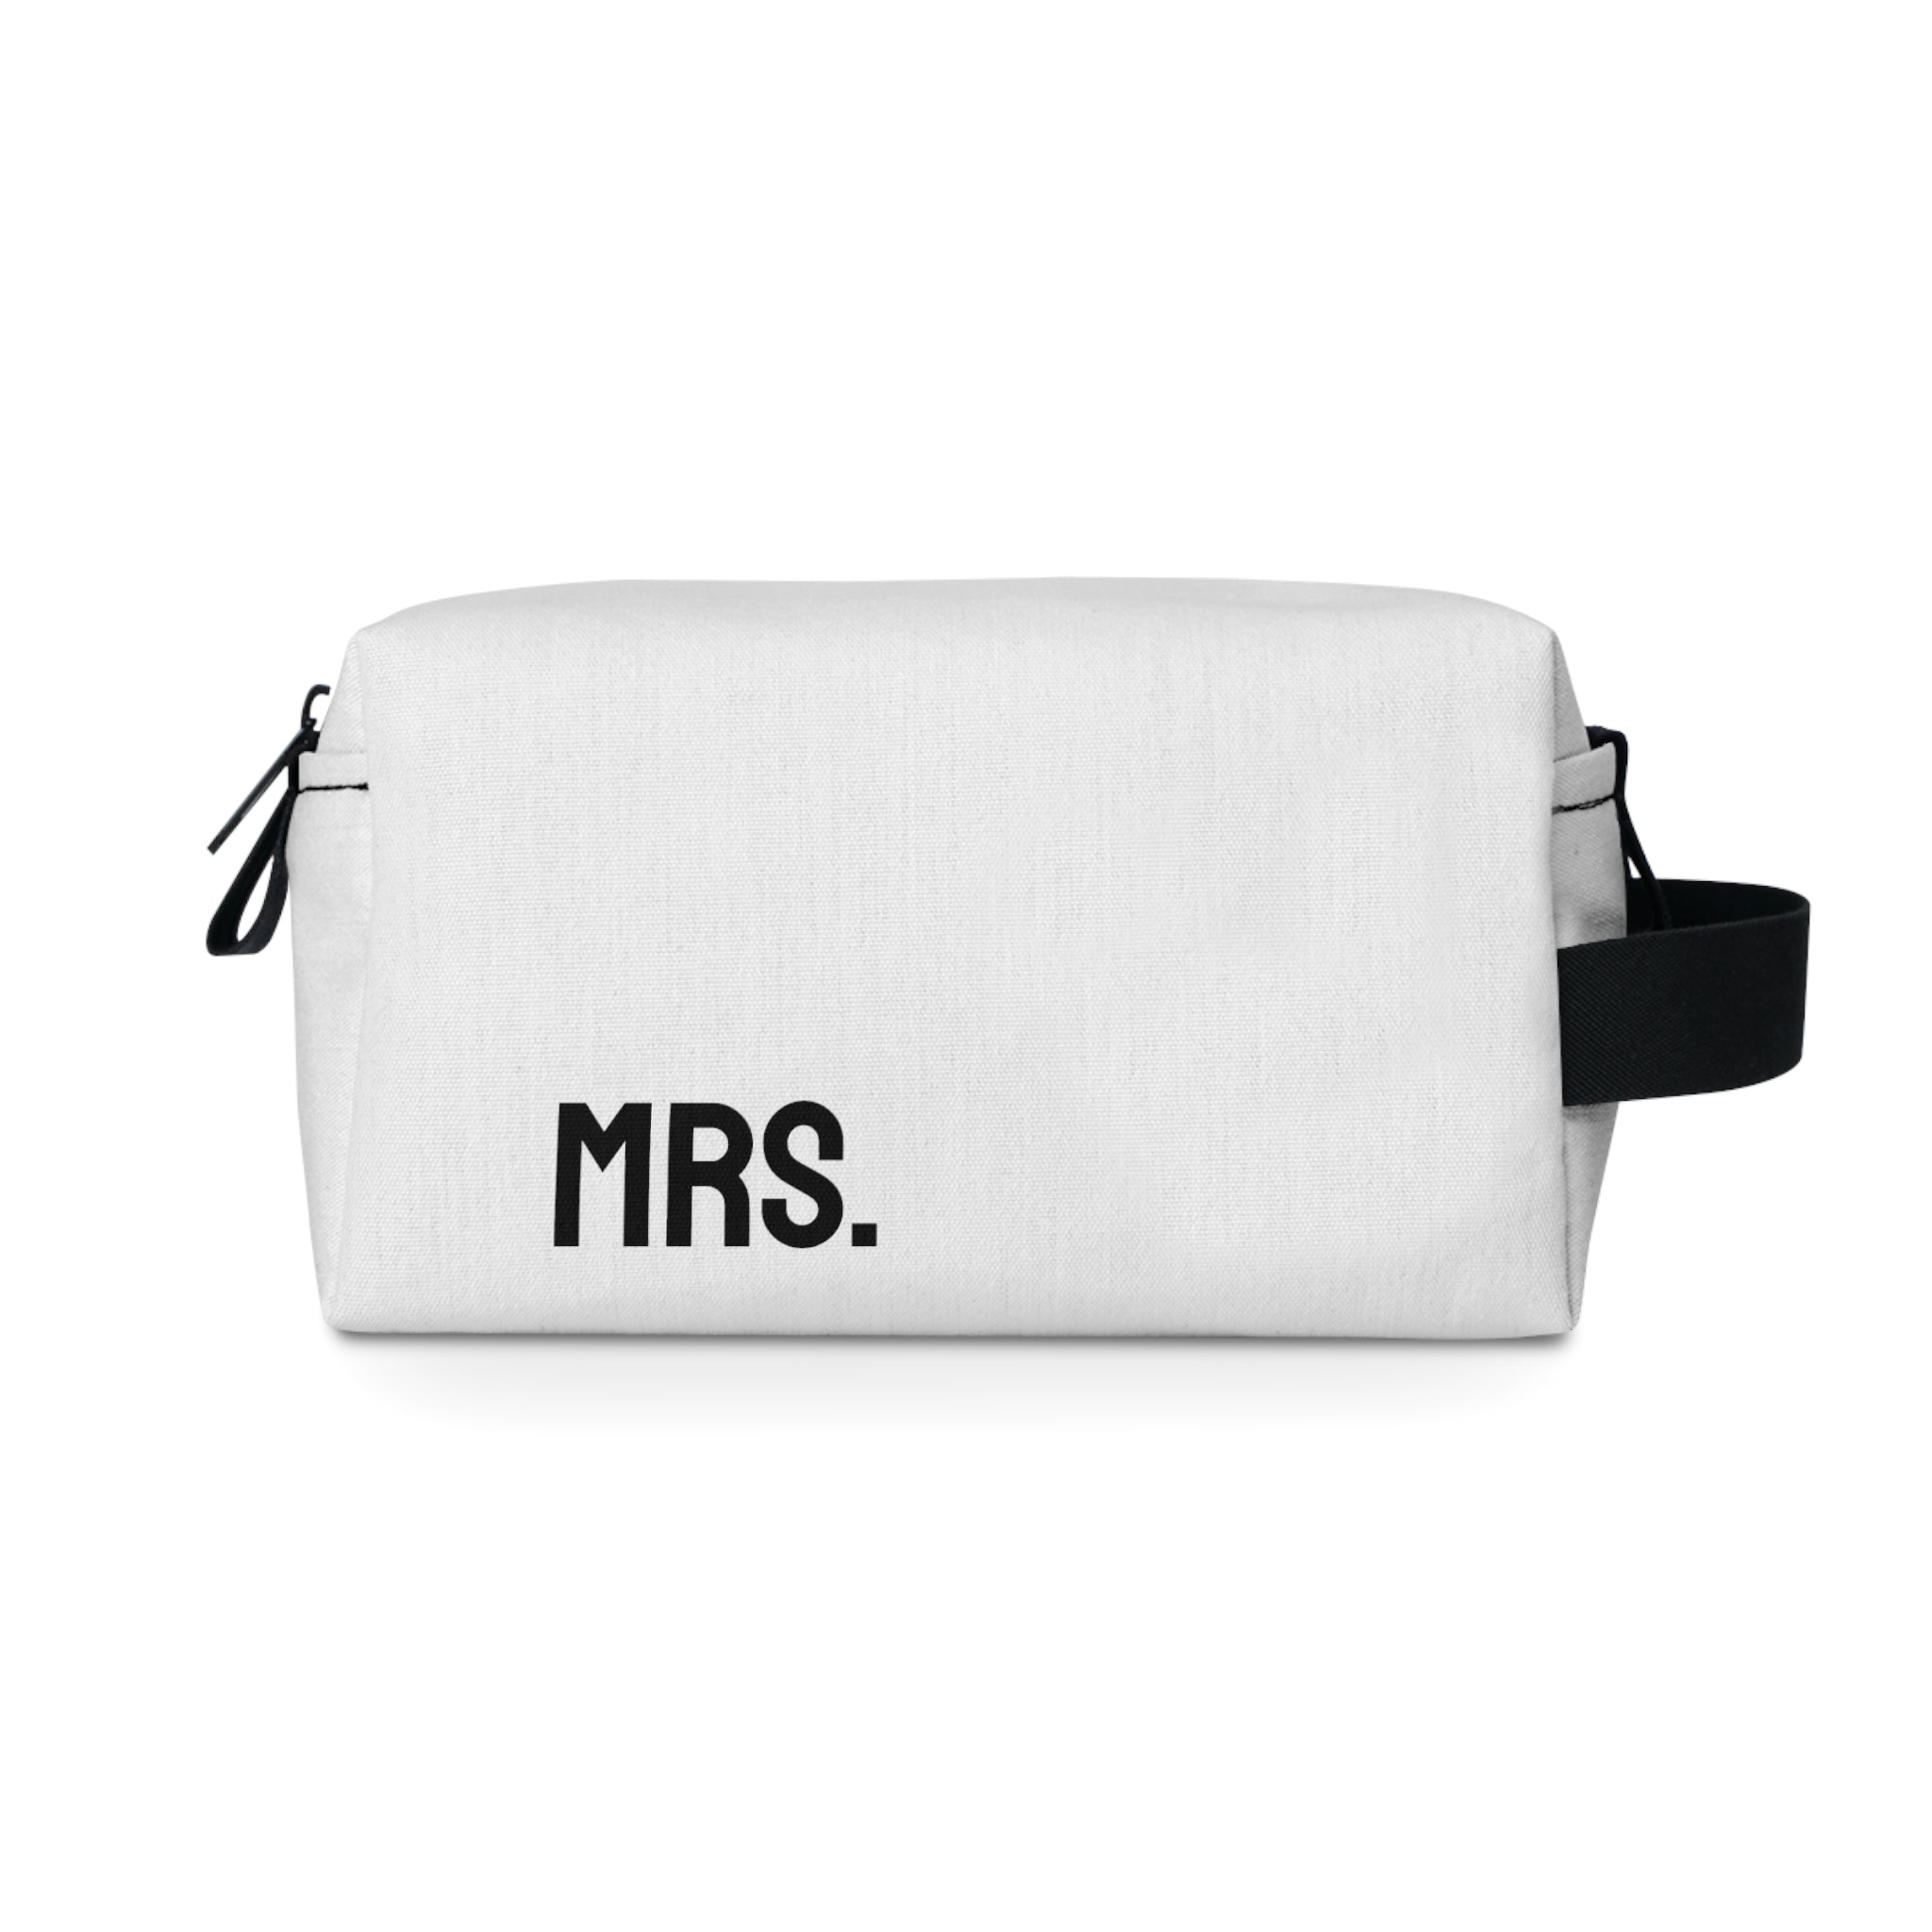 Mrs. Toiletry Pouch (White)